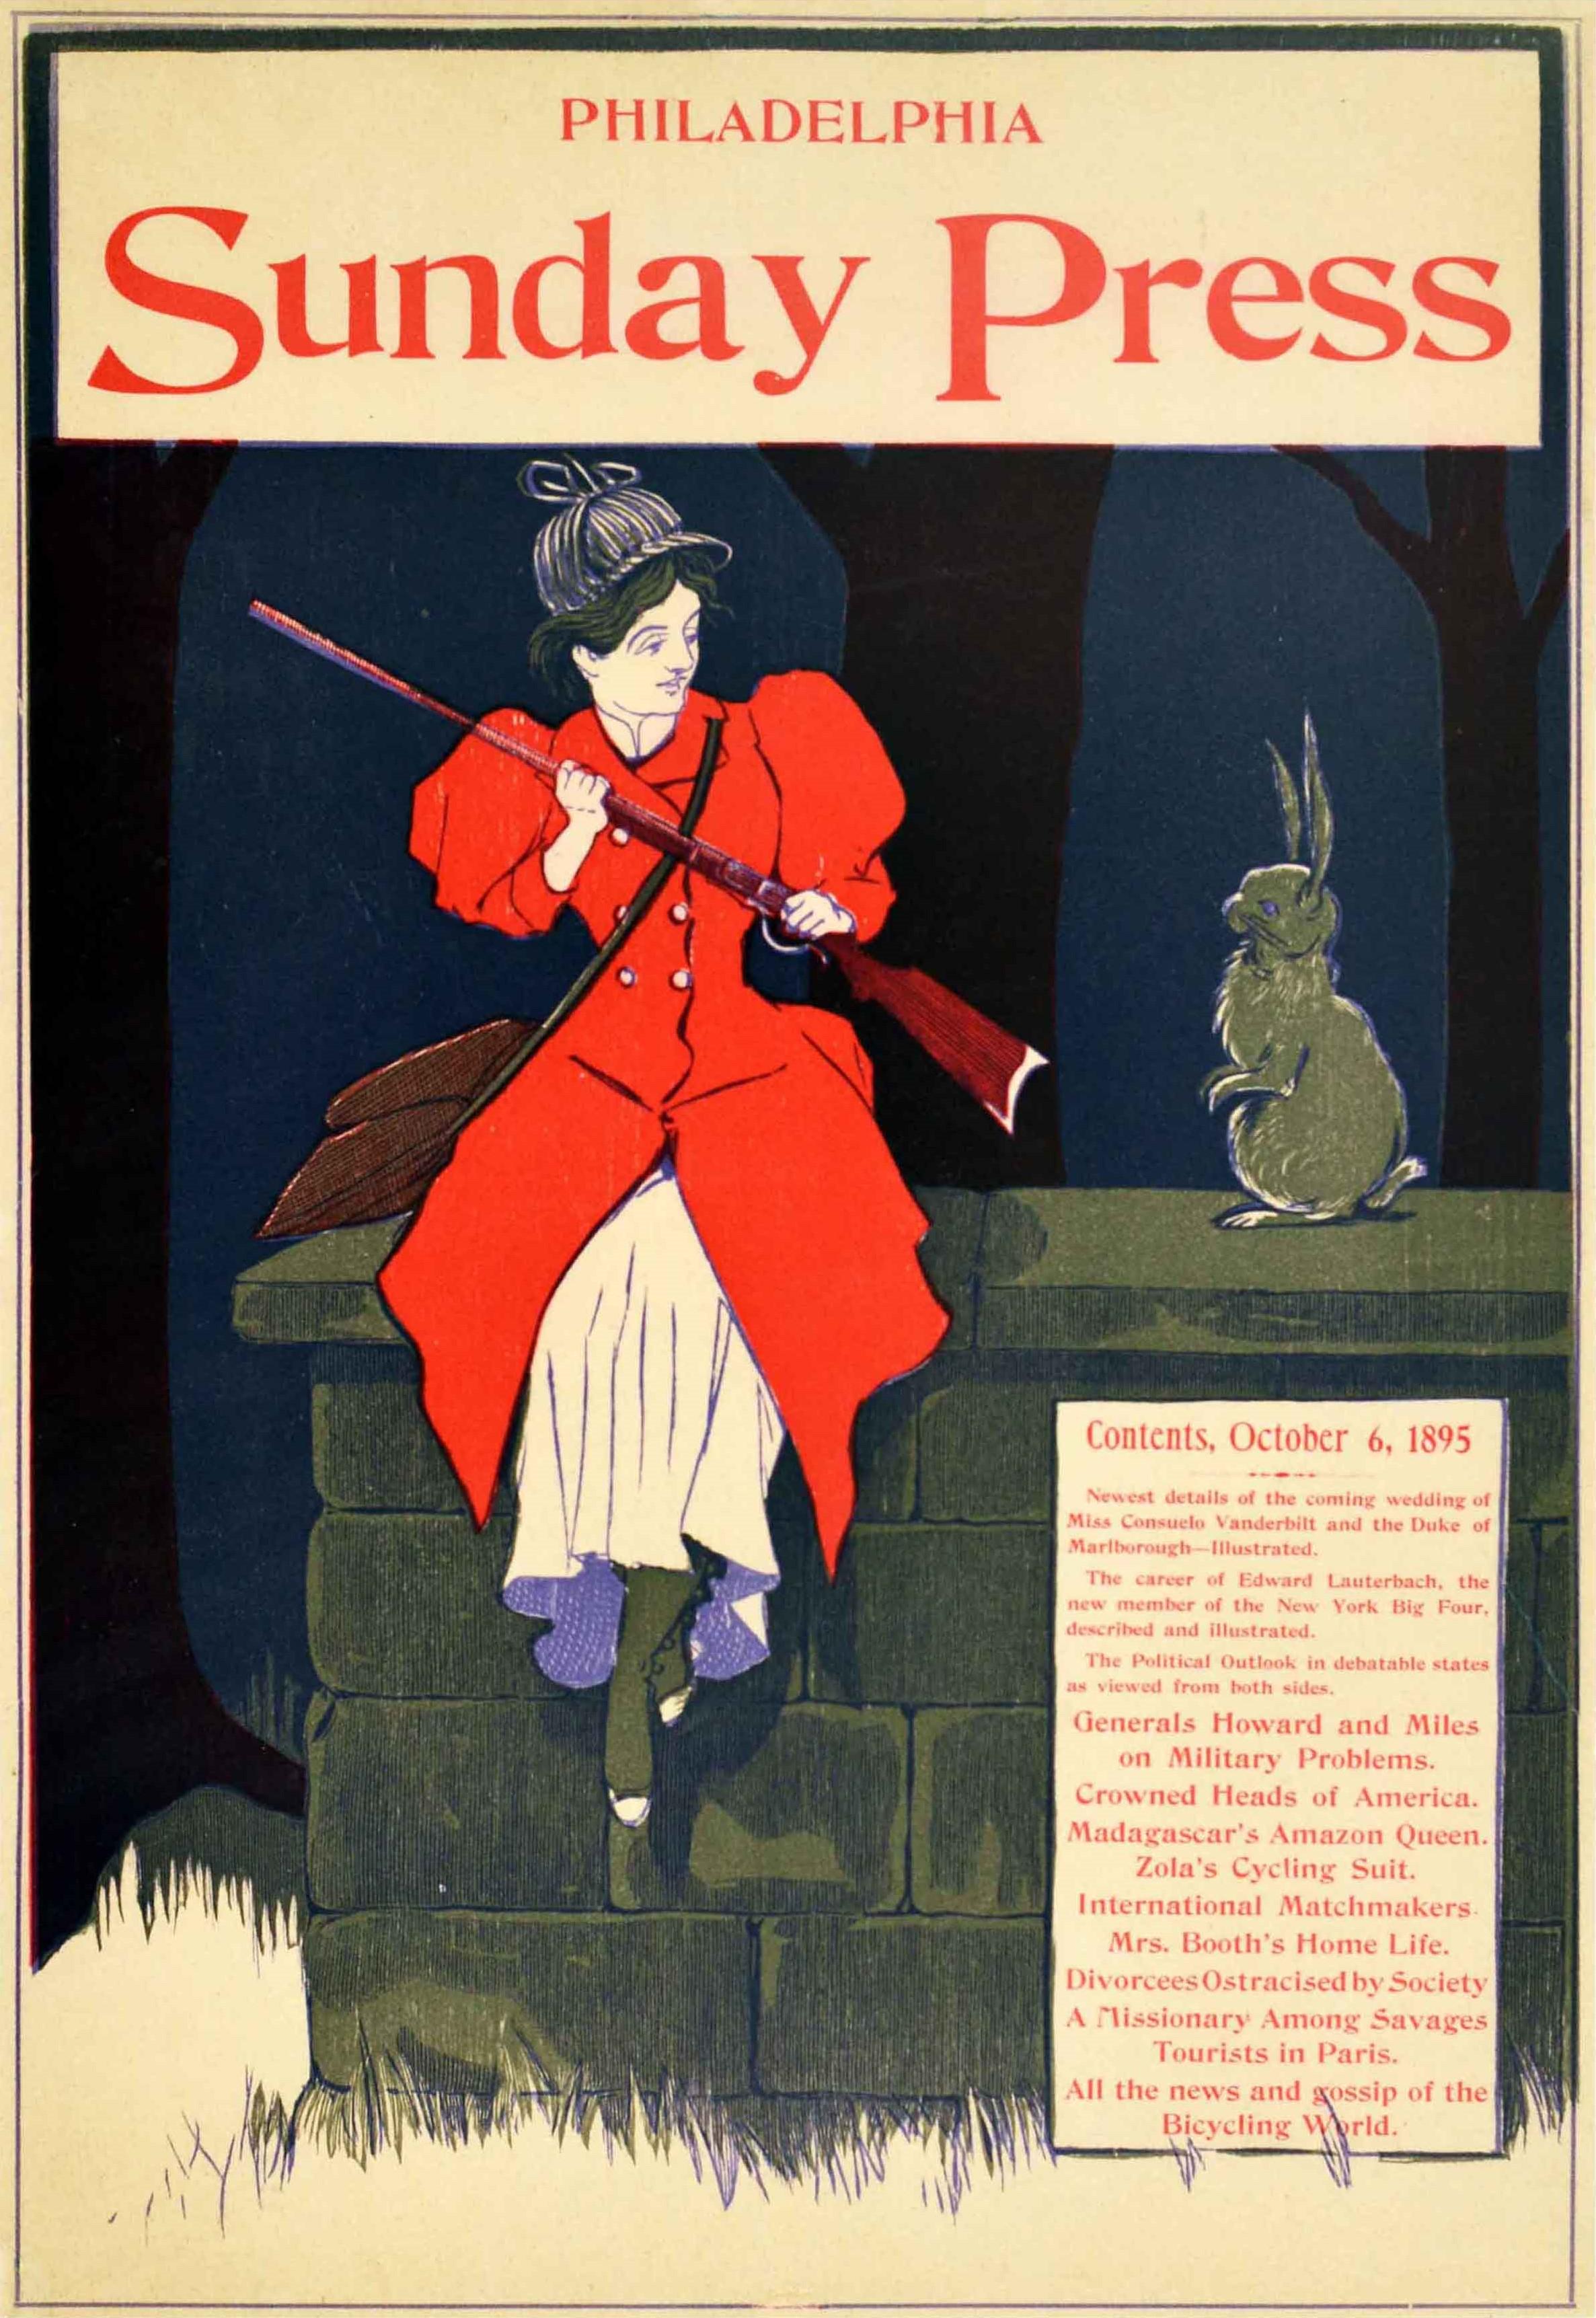 Original antique advertising poster for the 6 October 1895 issue of the Philadelphia Sunday Press newspaper (1857-1920) featuring a colourful image of a lady in a red hunter coat, deerstalker hat and bag over her shoulder, holding a rifle gun and